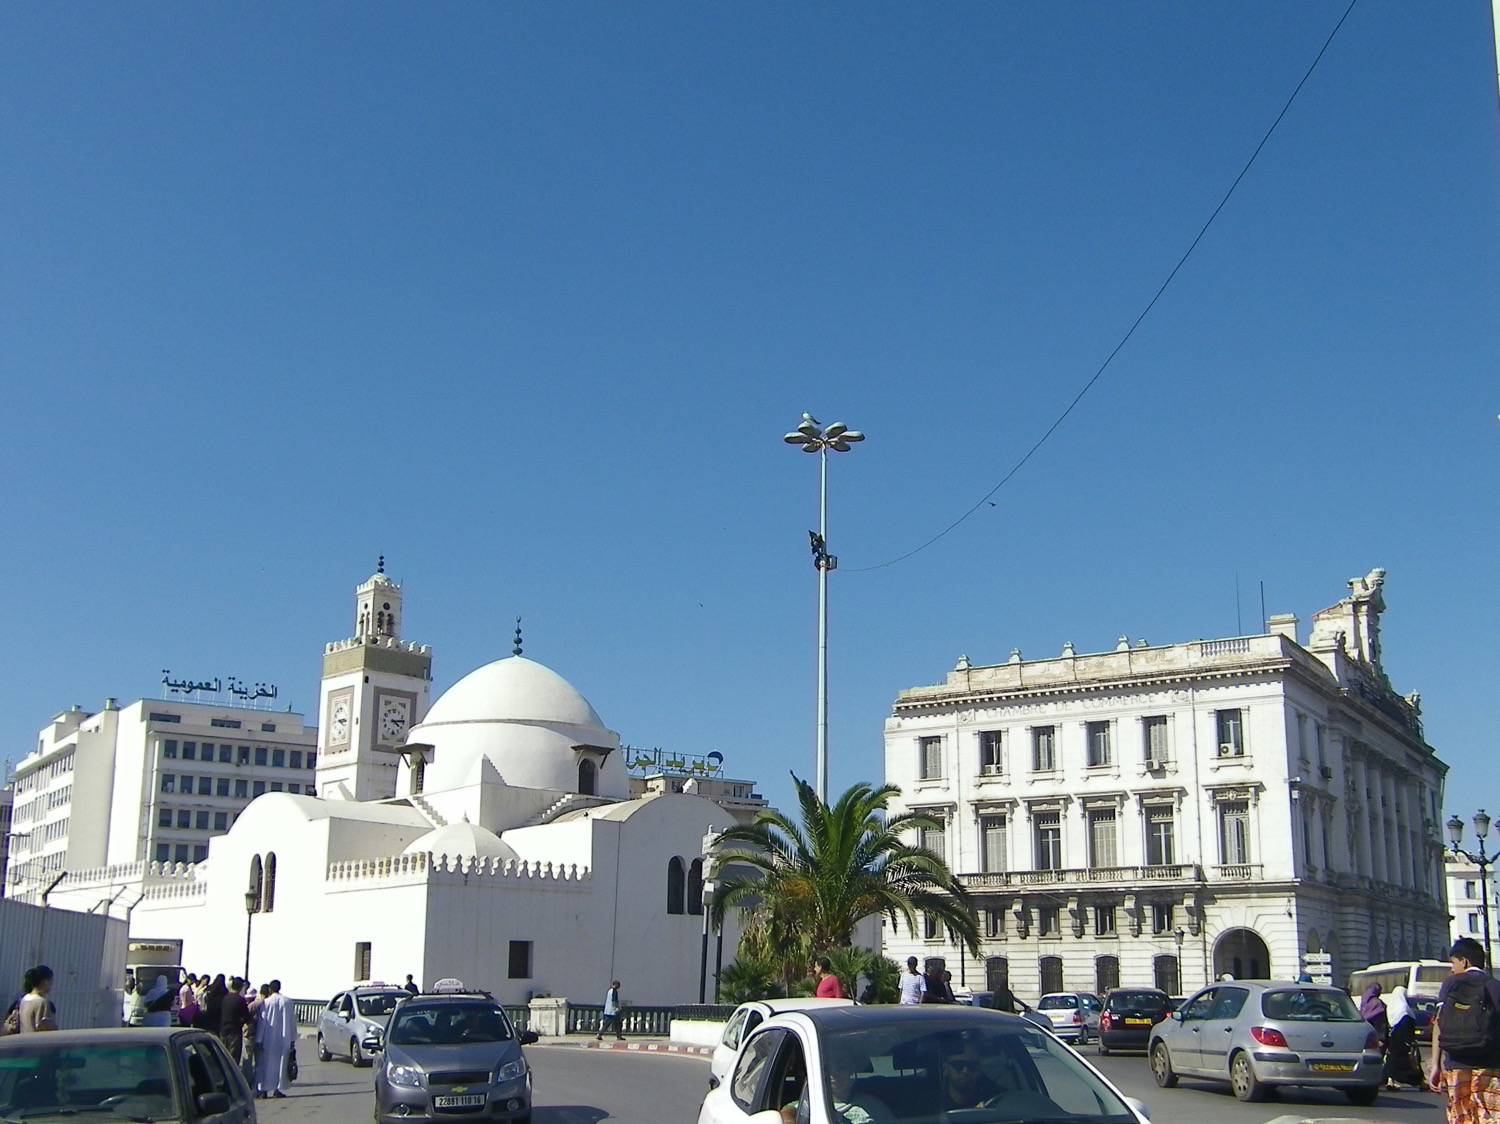 Exterior view from across the square